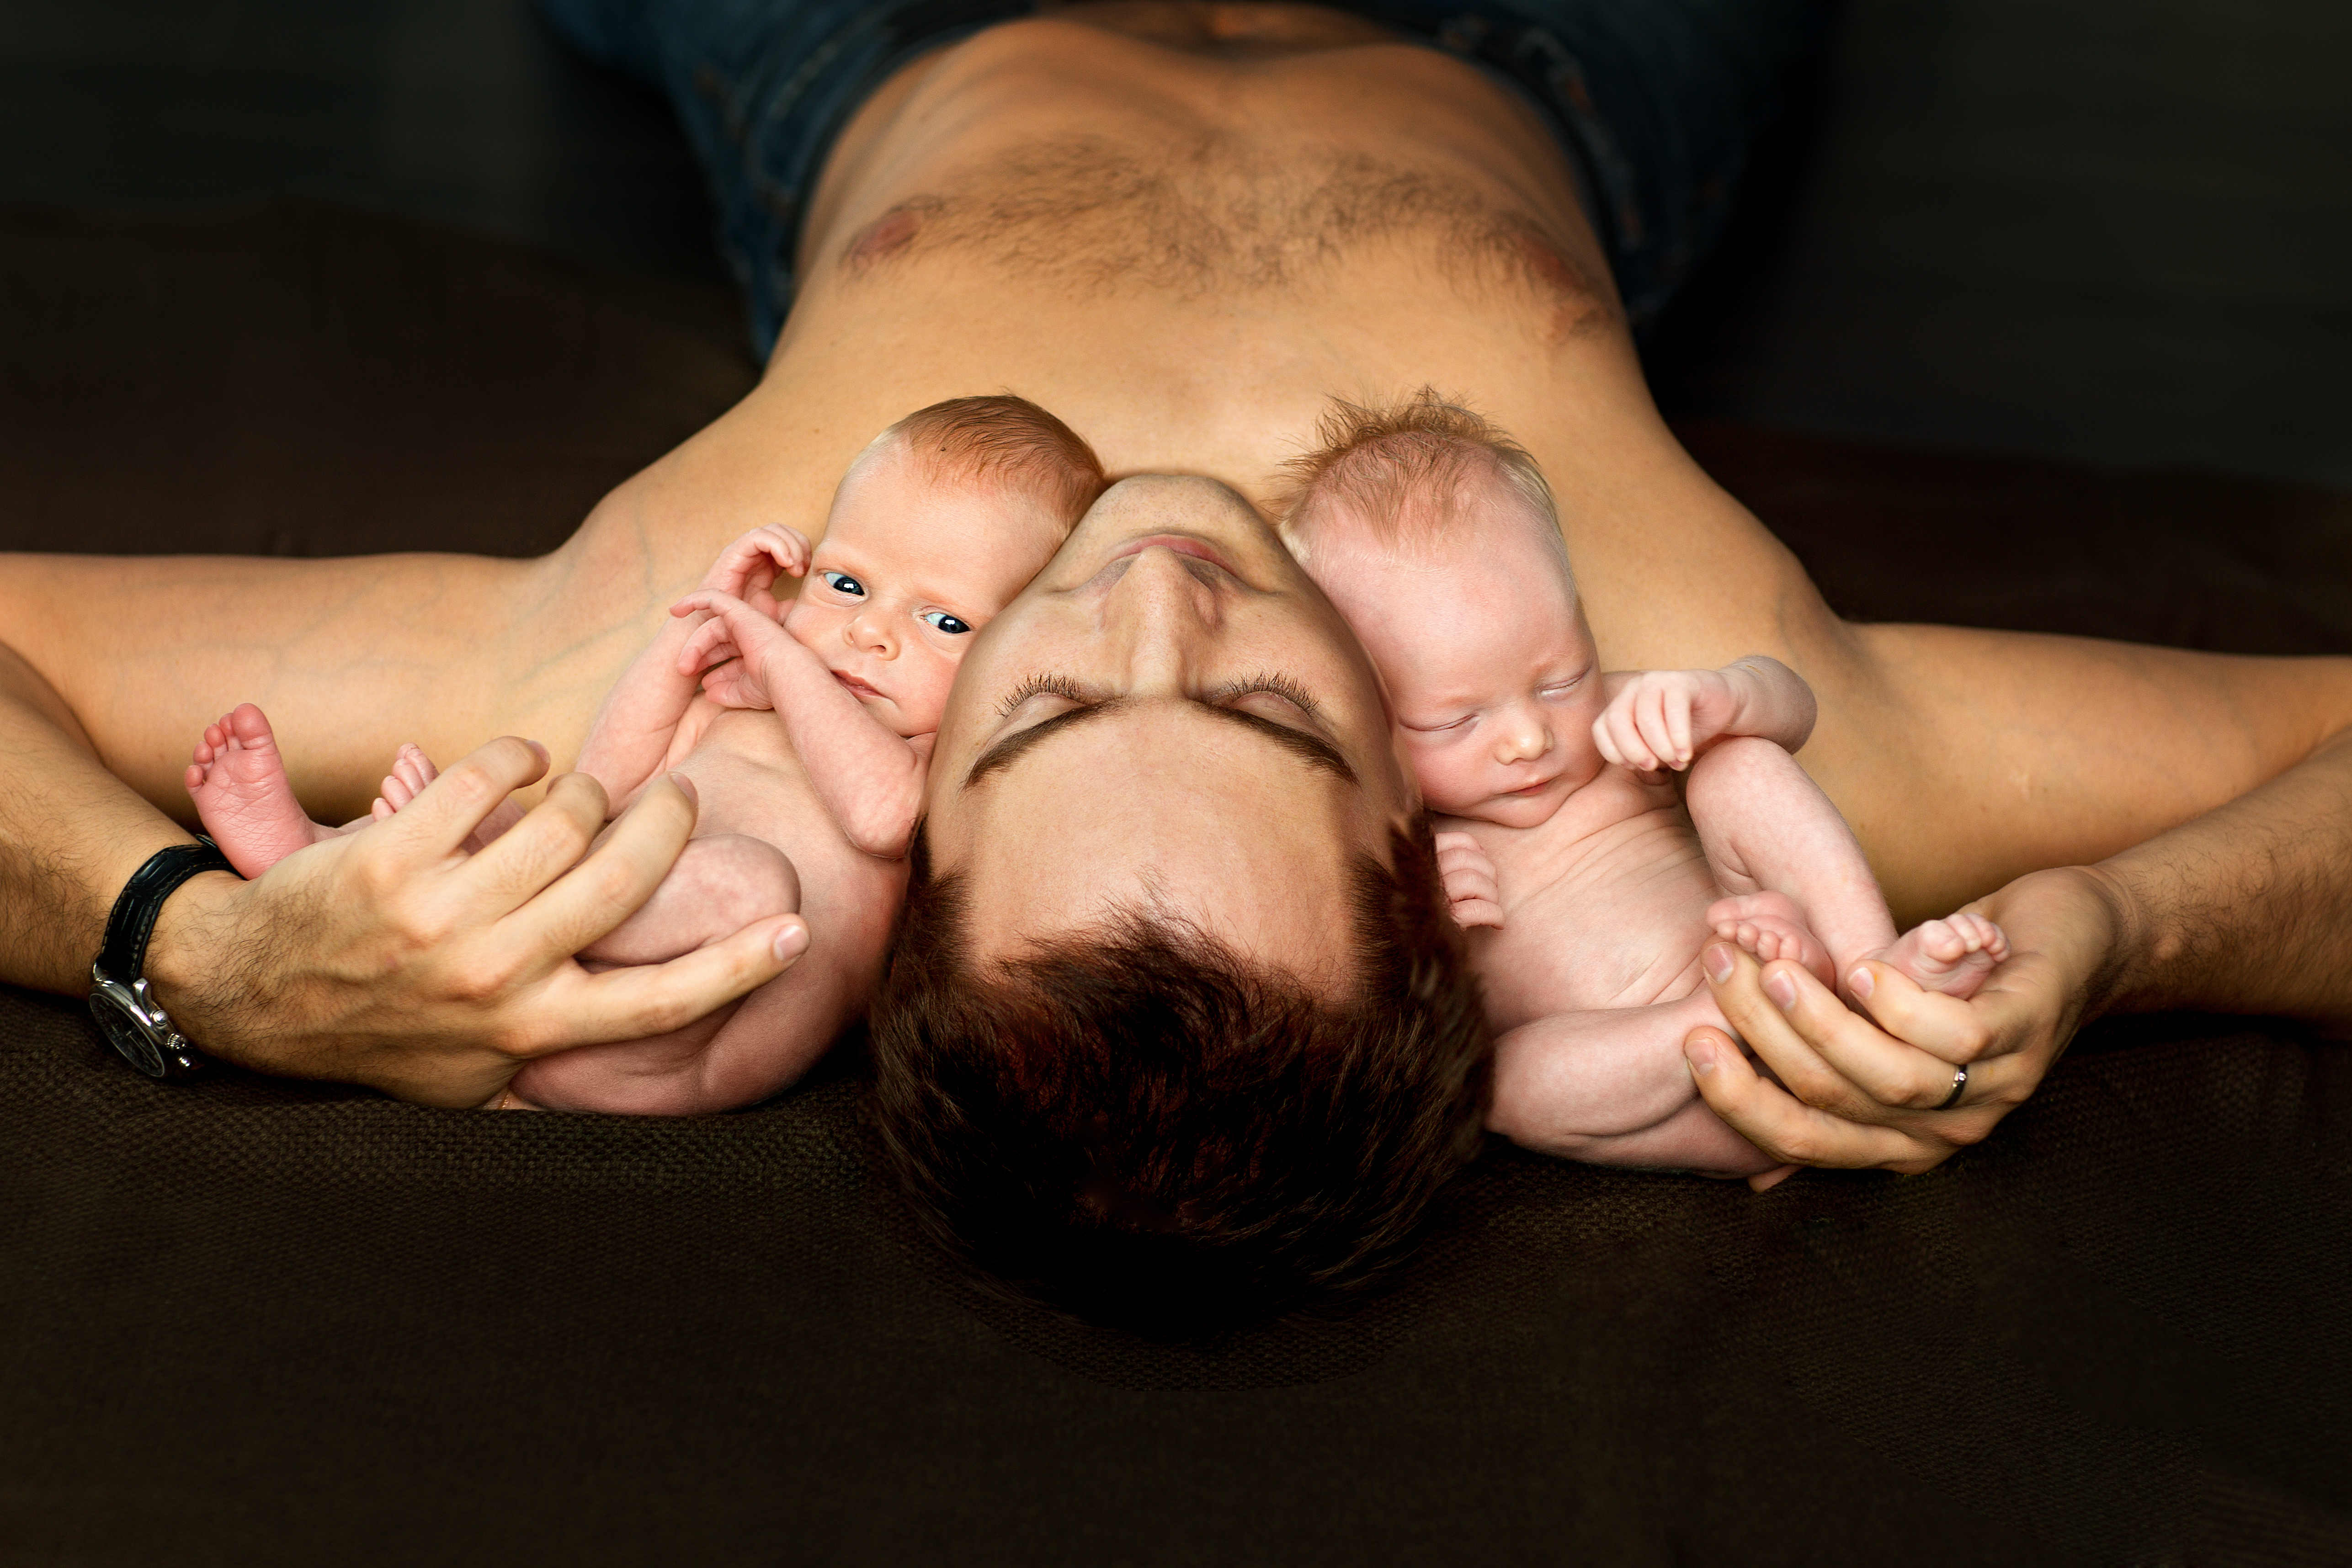 Man with two babies. | Source: Shutterstock